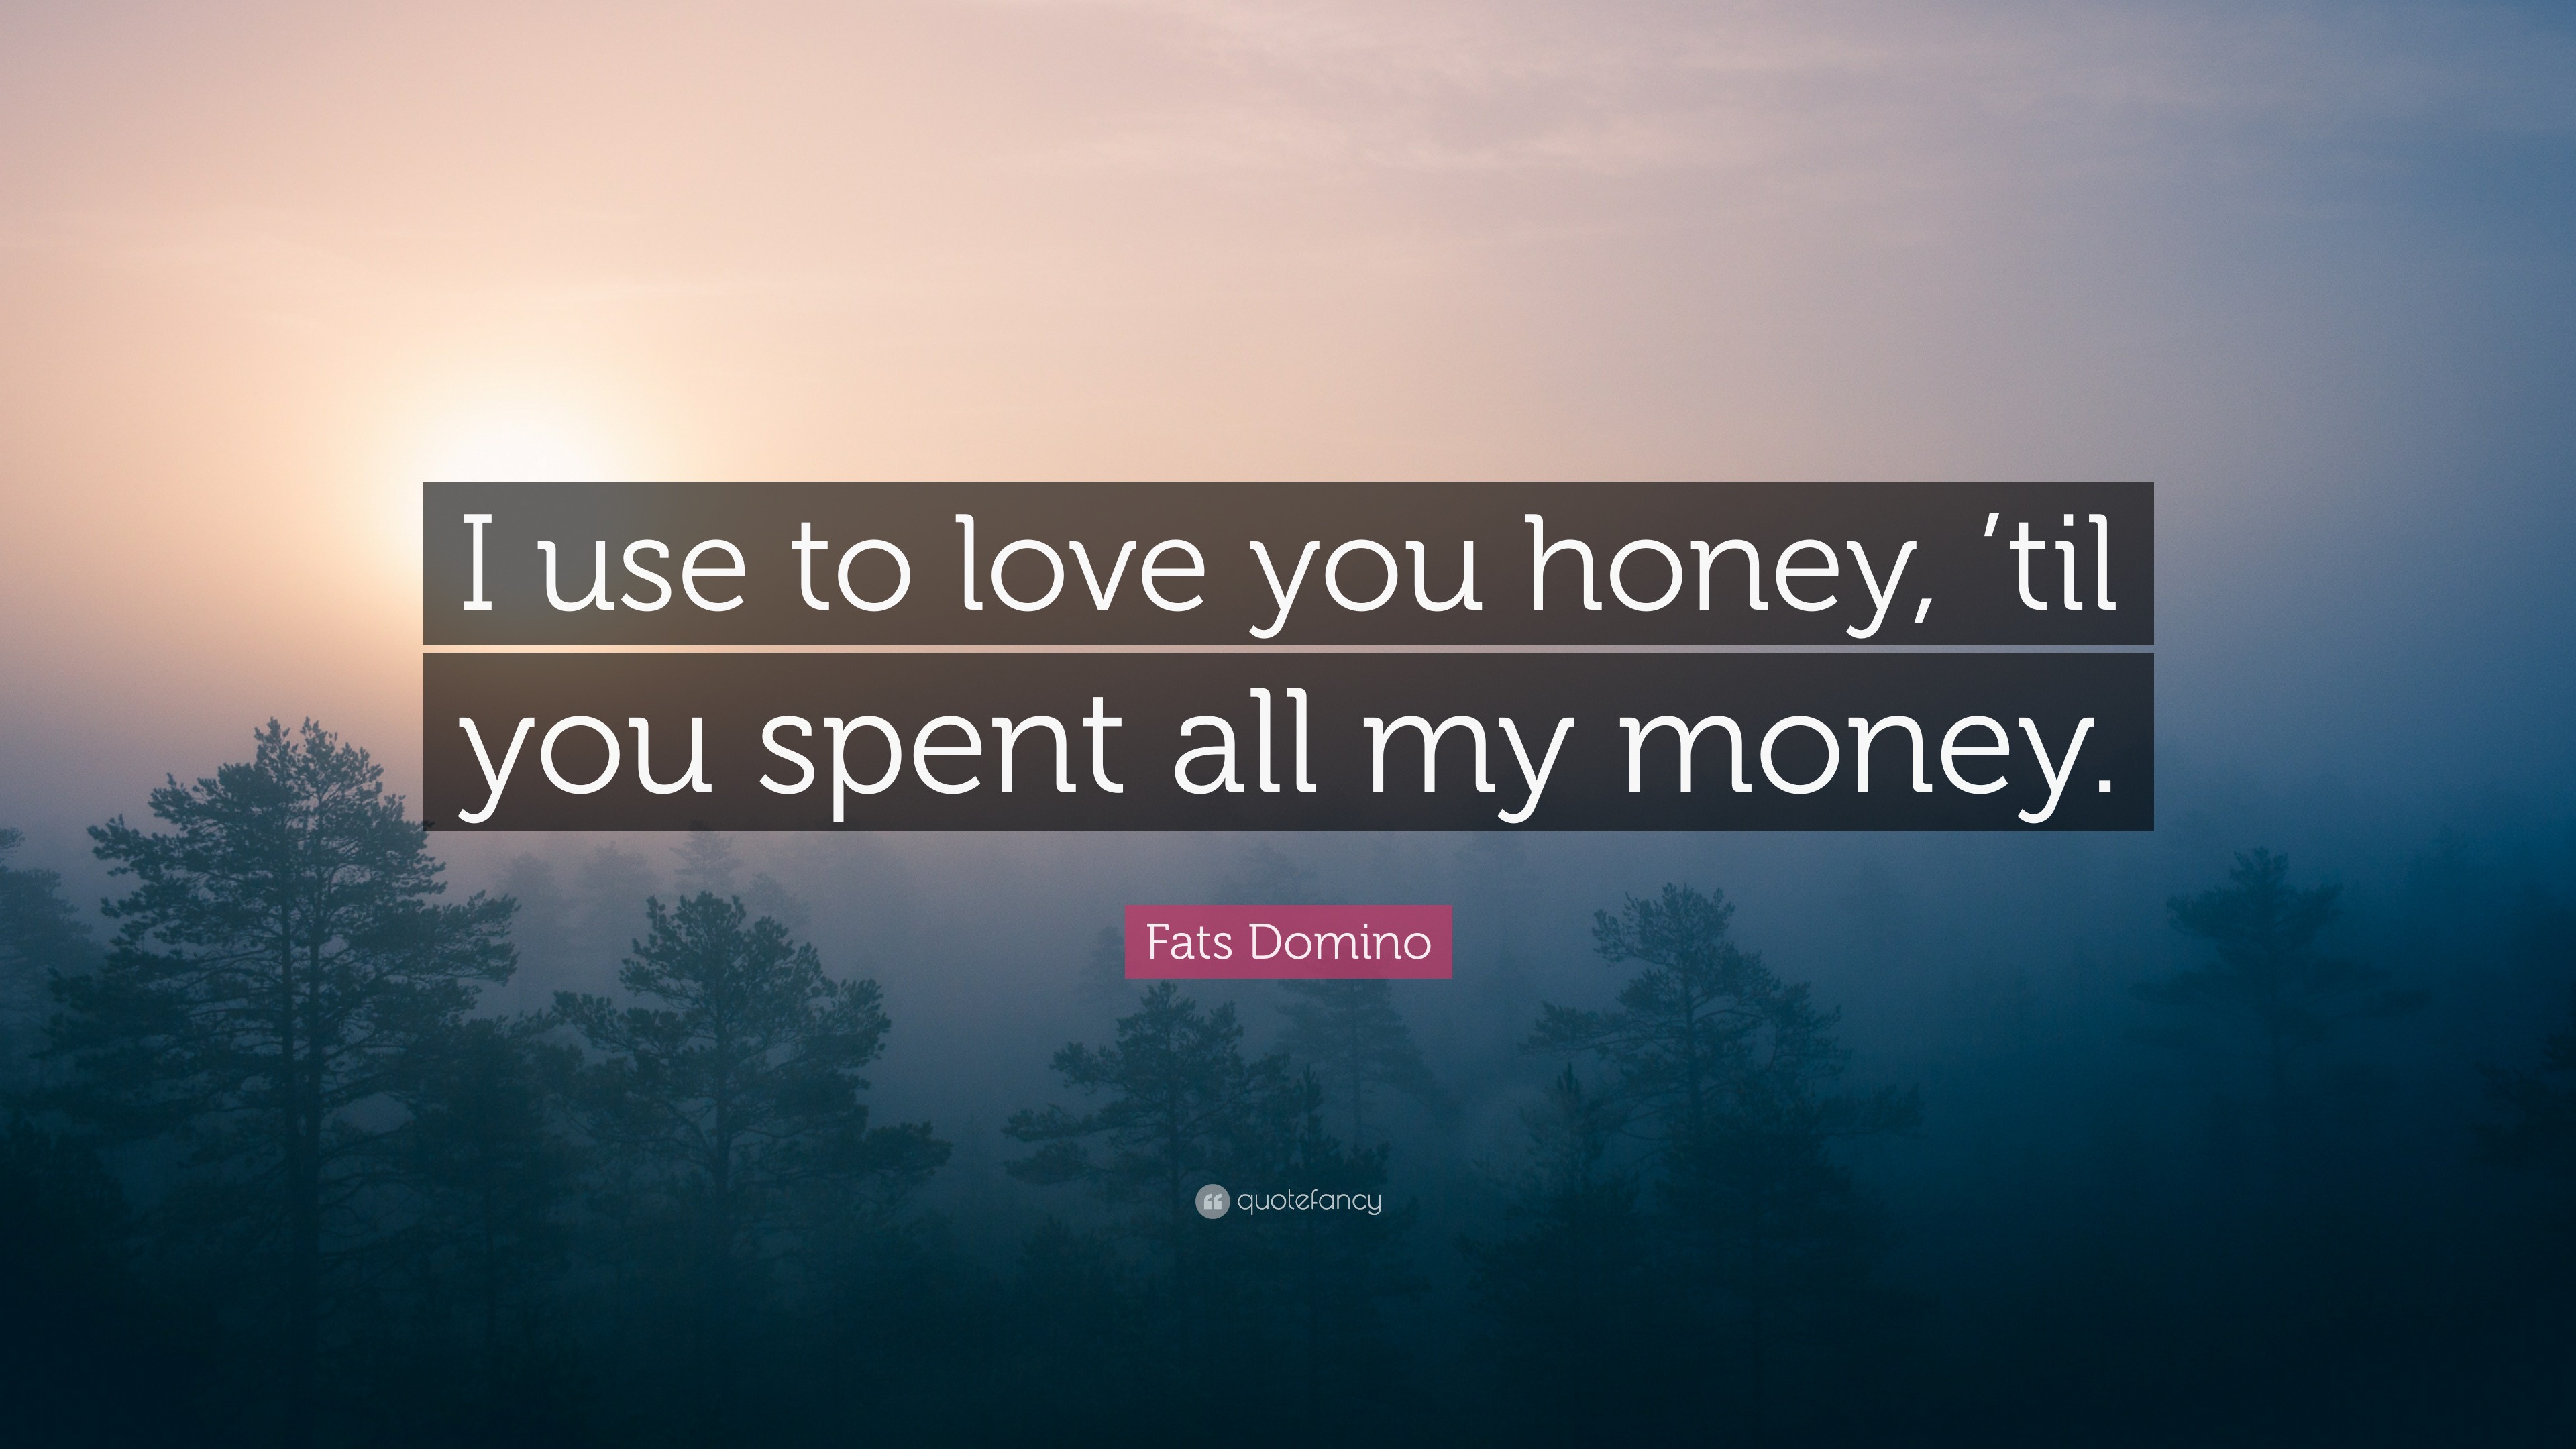 Fats Domino Quote: “I use to love you honey, 'til you spent all my money.”